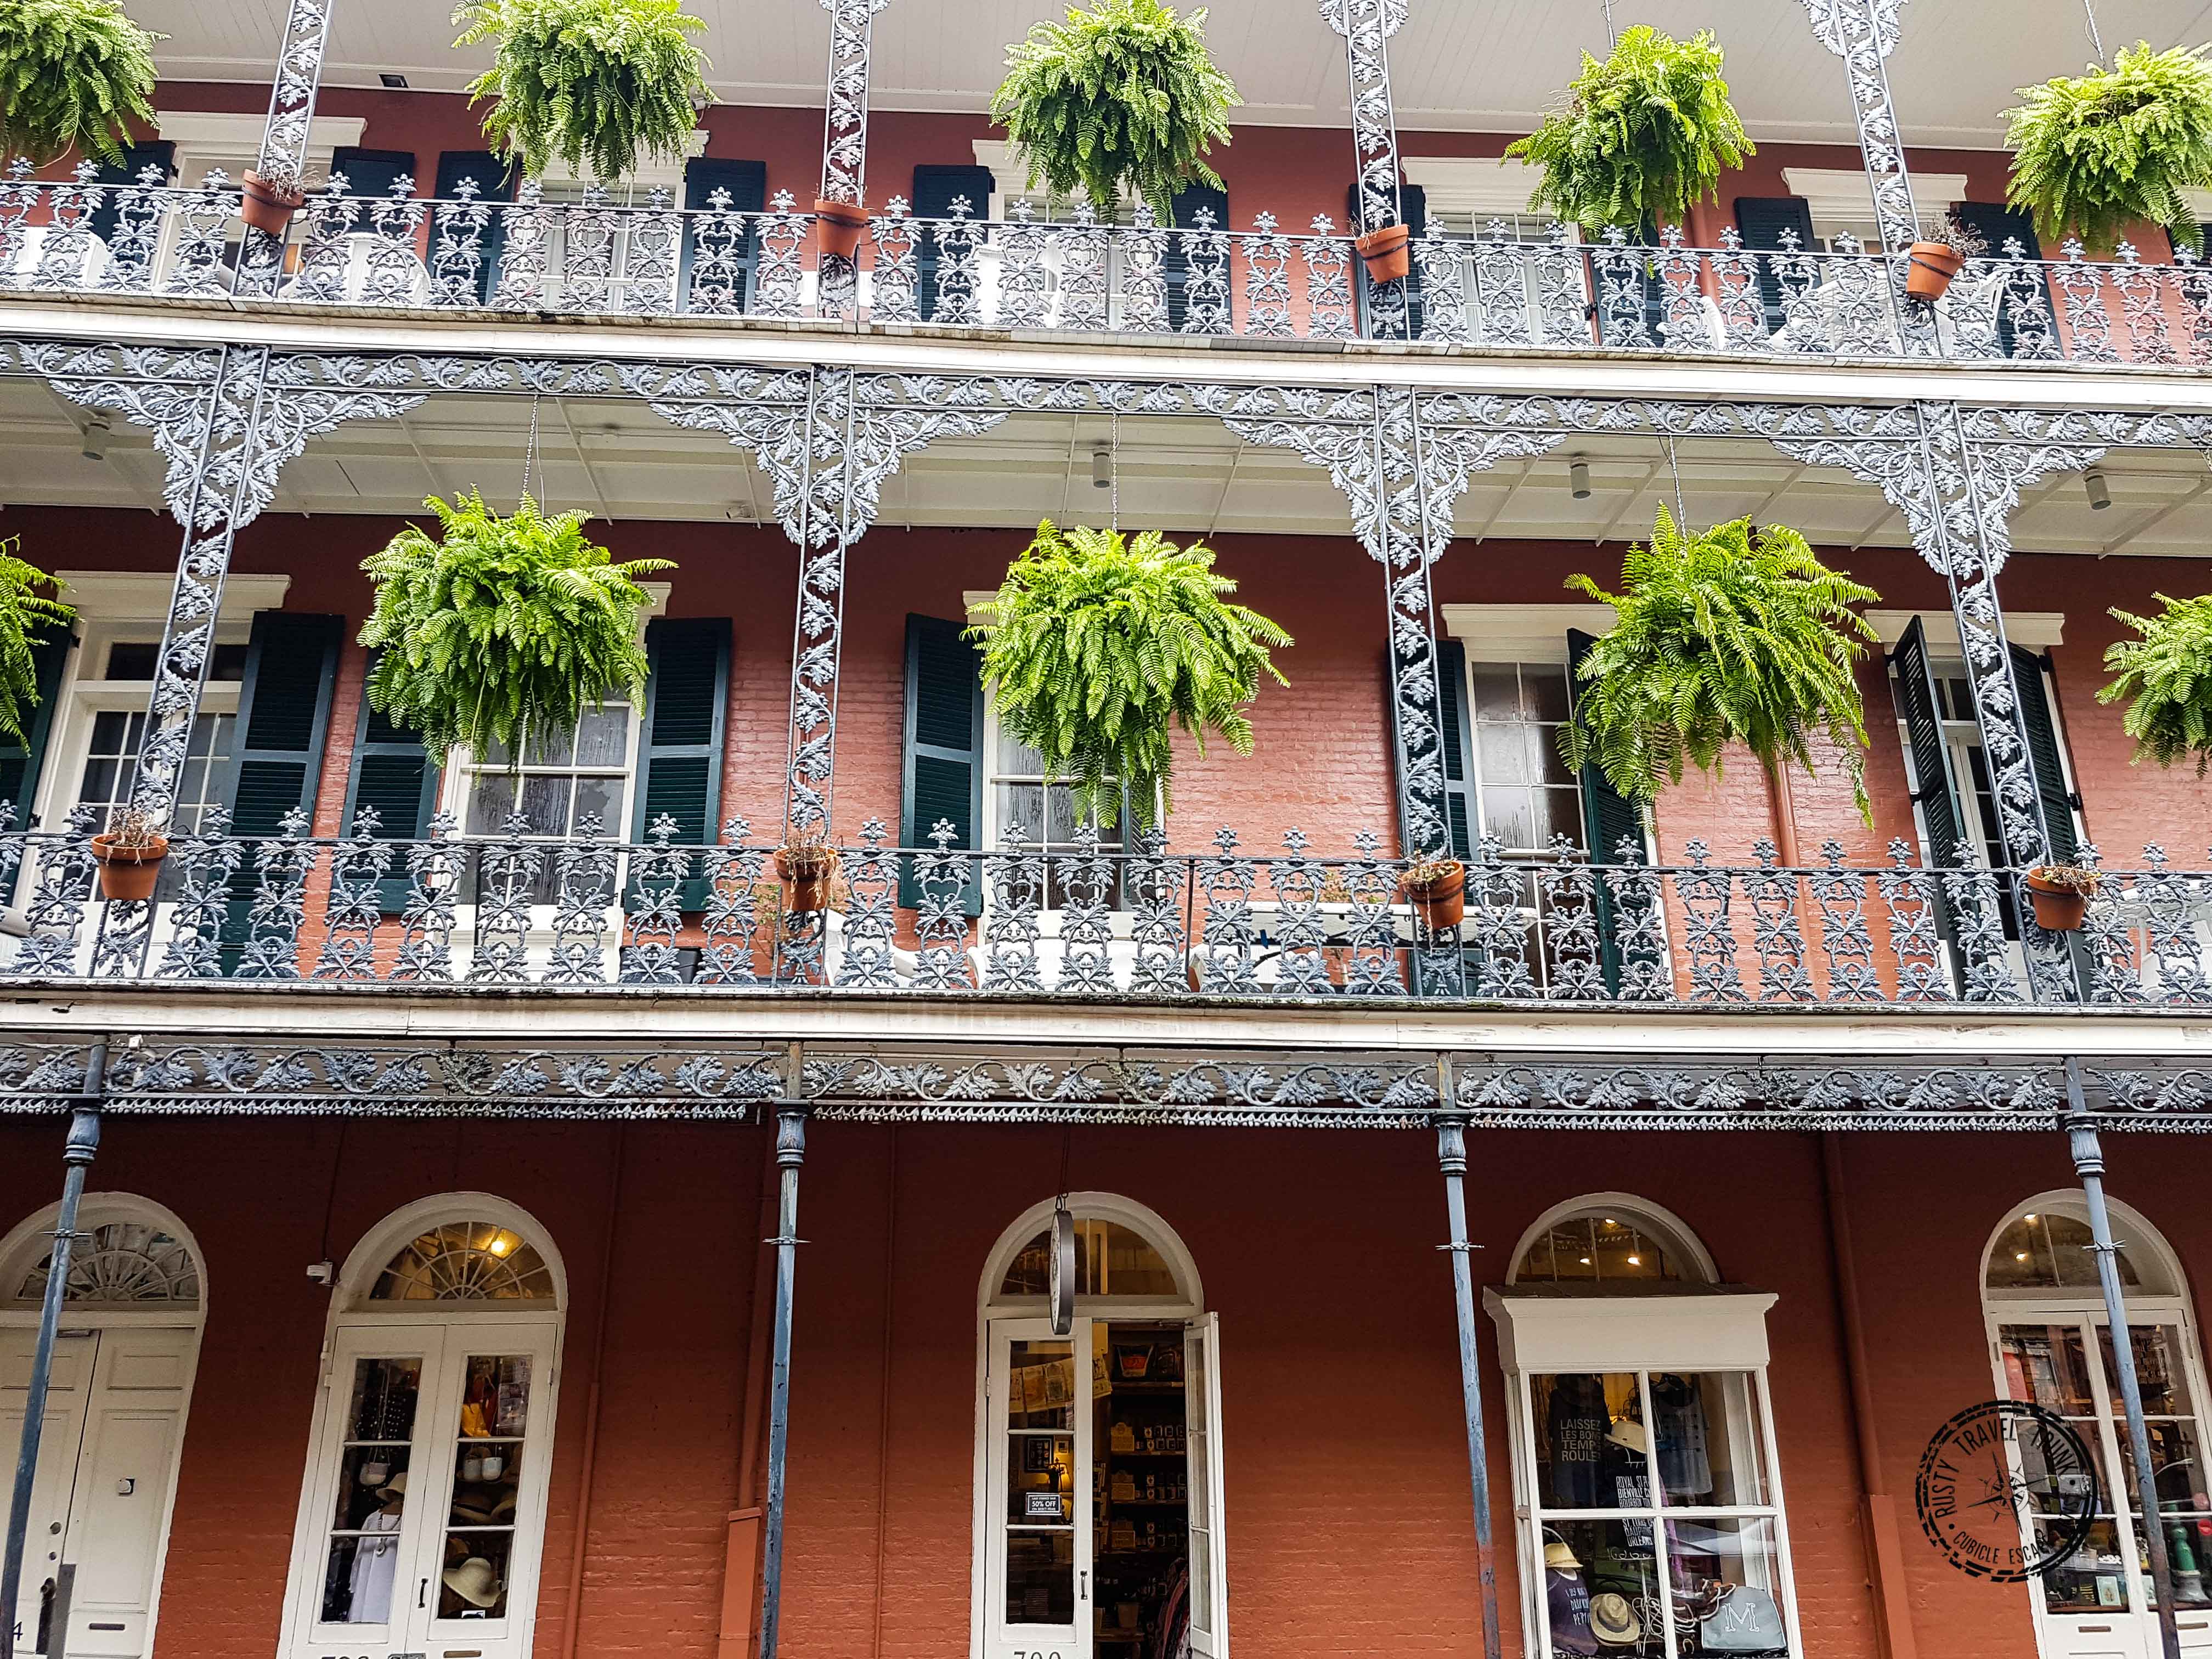 Check out the French Quarter in New Orleans! Rusty Travel Trunk